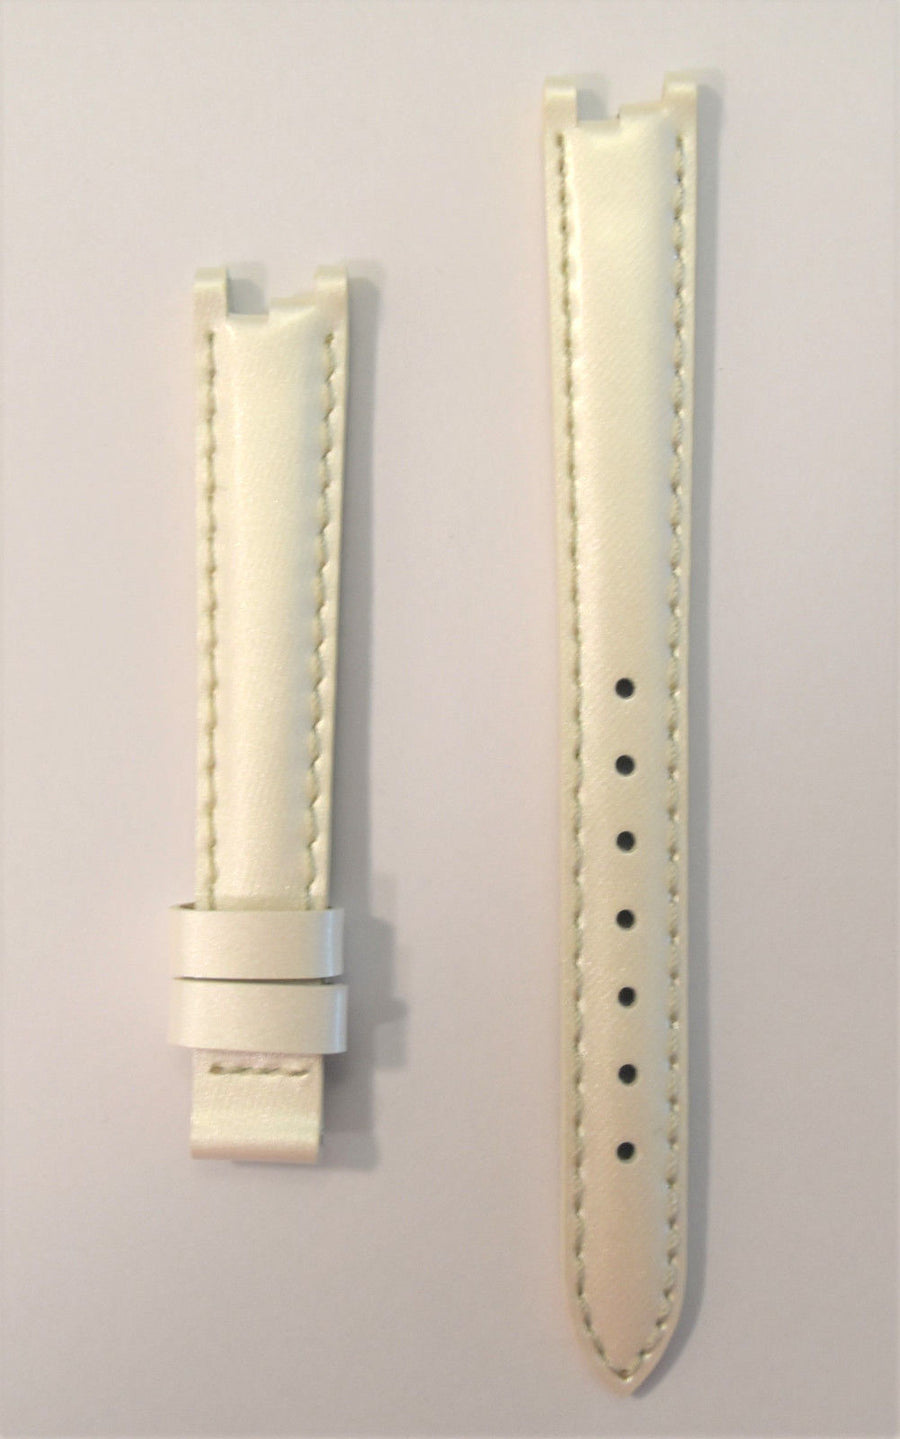 Tissot Women's Flamingo T094210A White Pearl Leather Strap Watch Band - WATCHBAND EXPERT